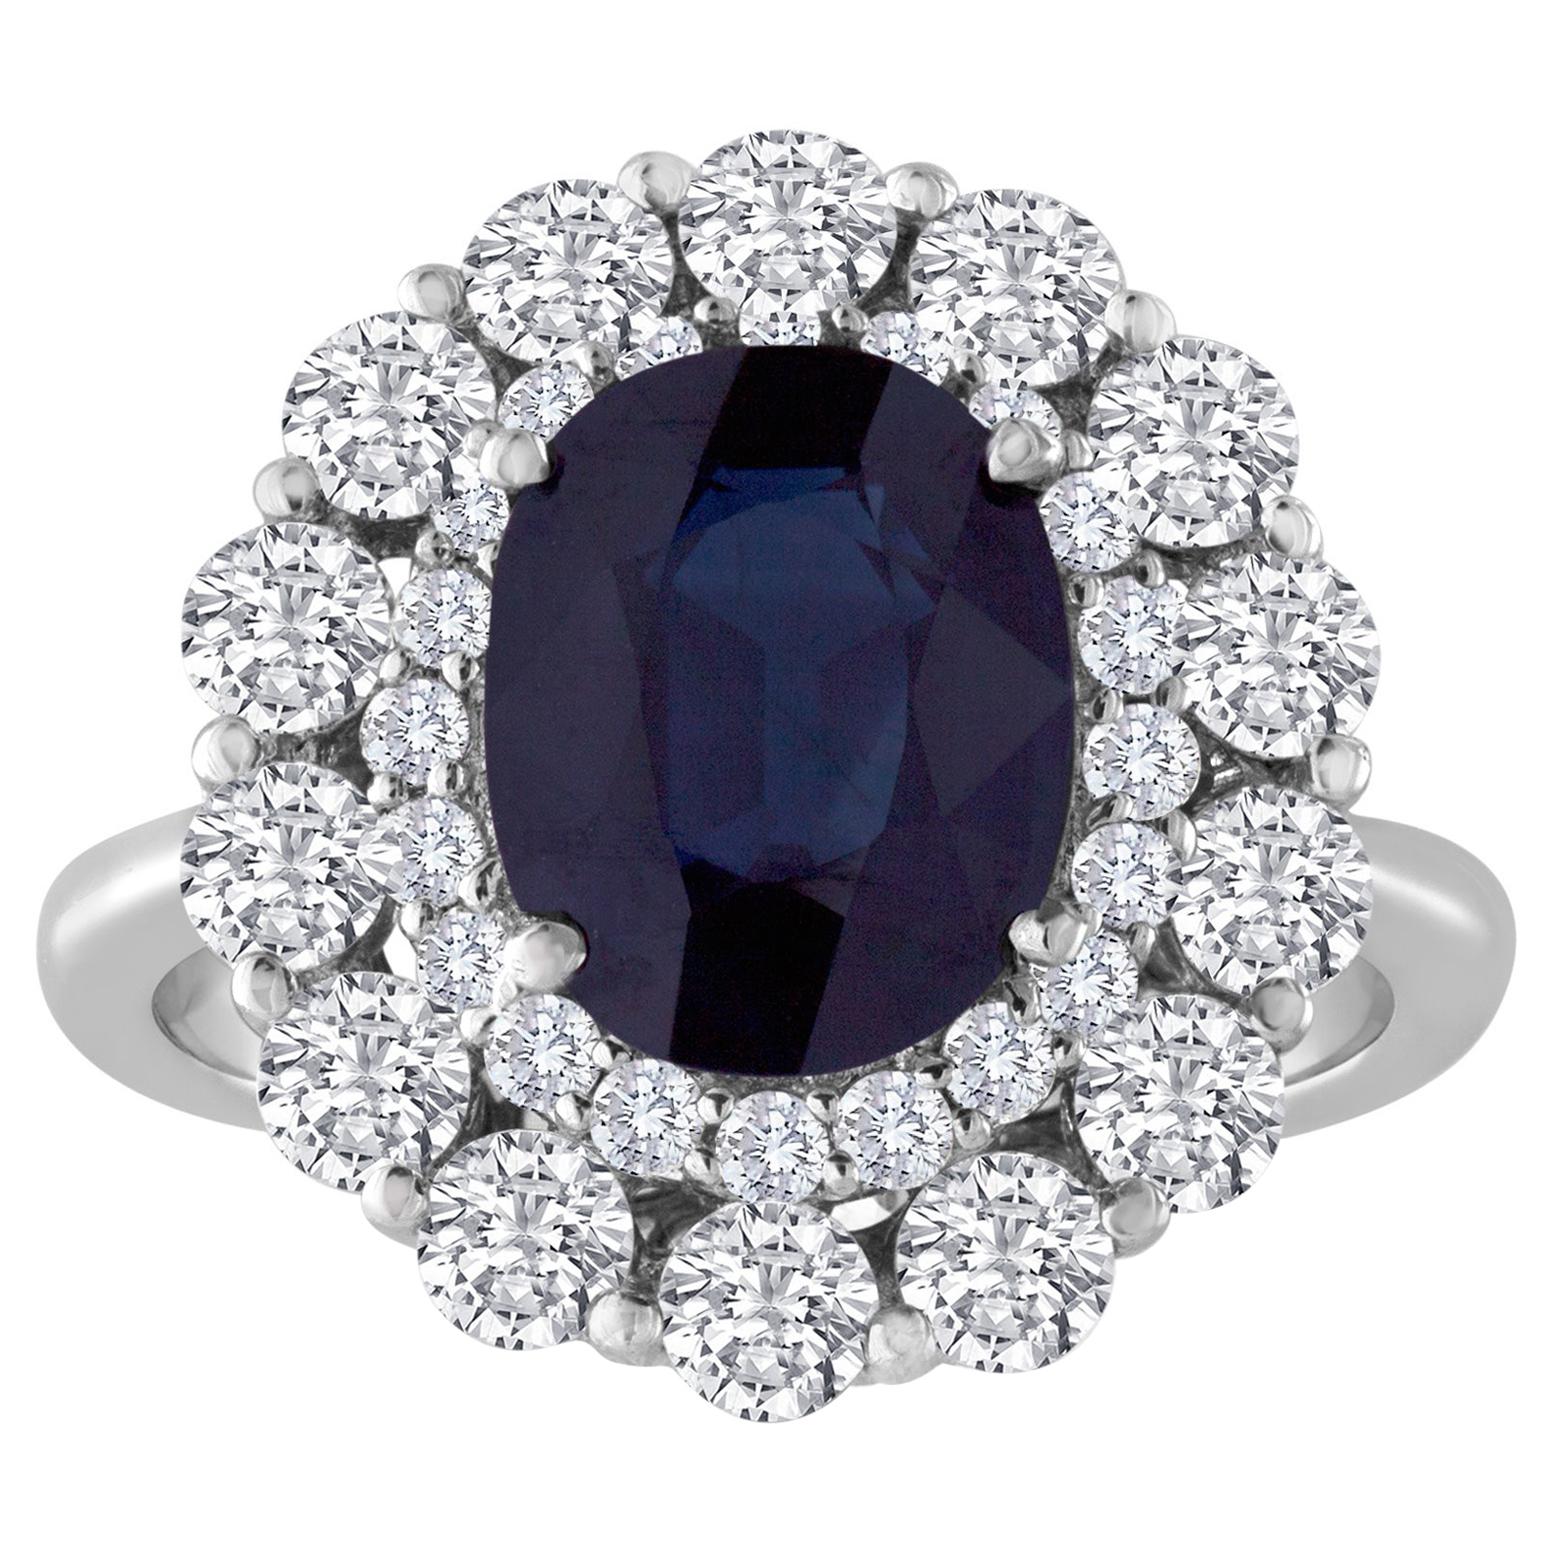 Certified No Heat 3.22 Carat Oval Blue Sapphire Diamond Gold Ring For Sale